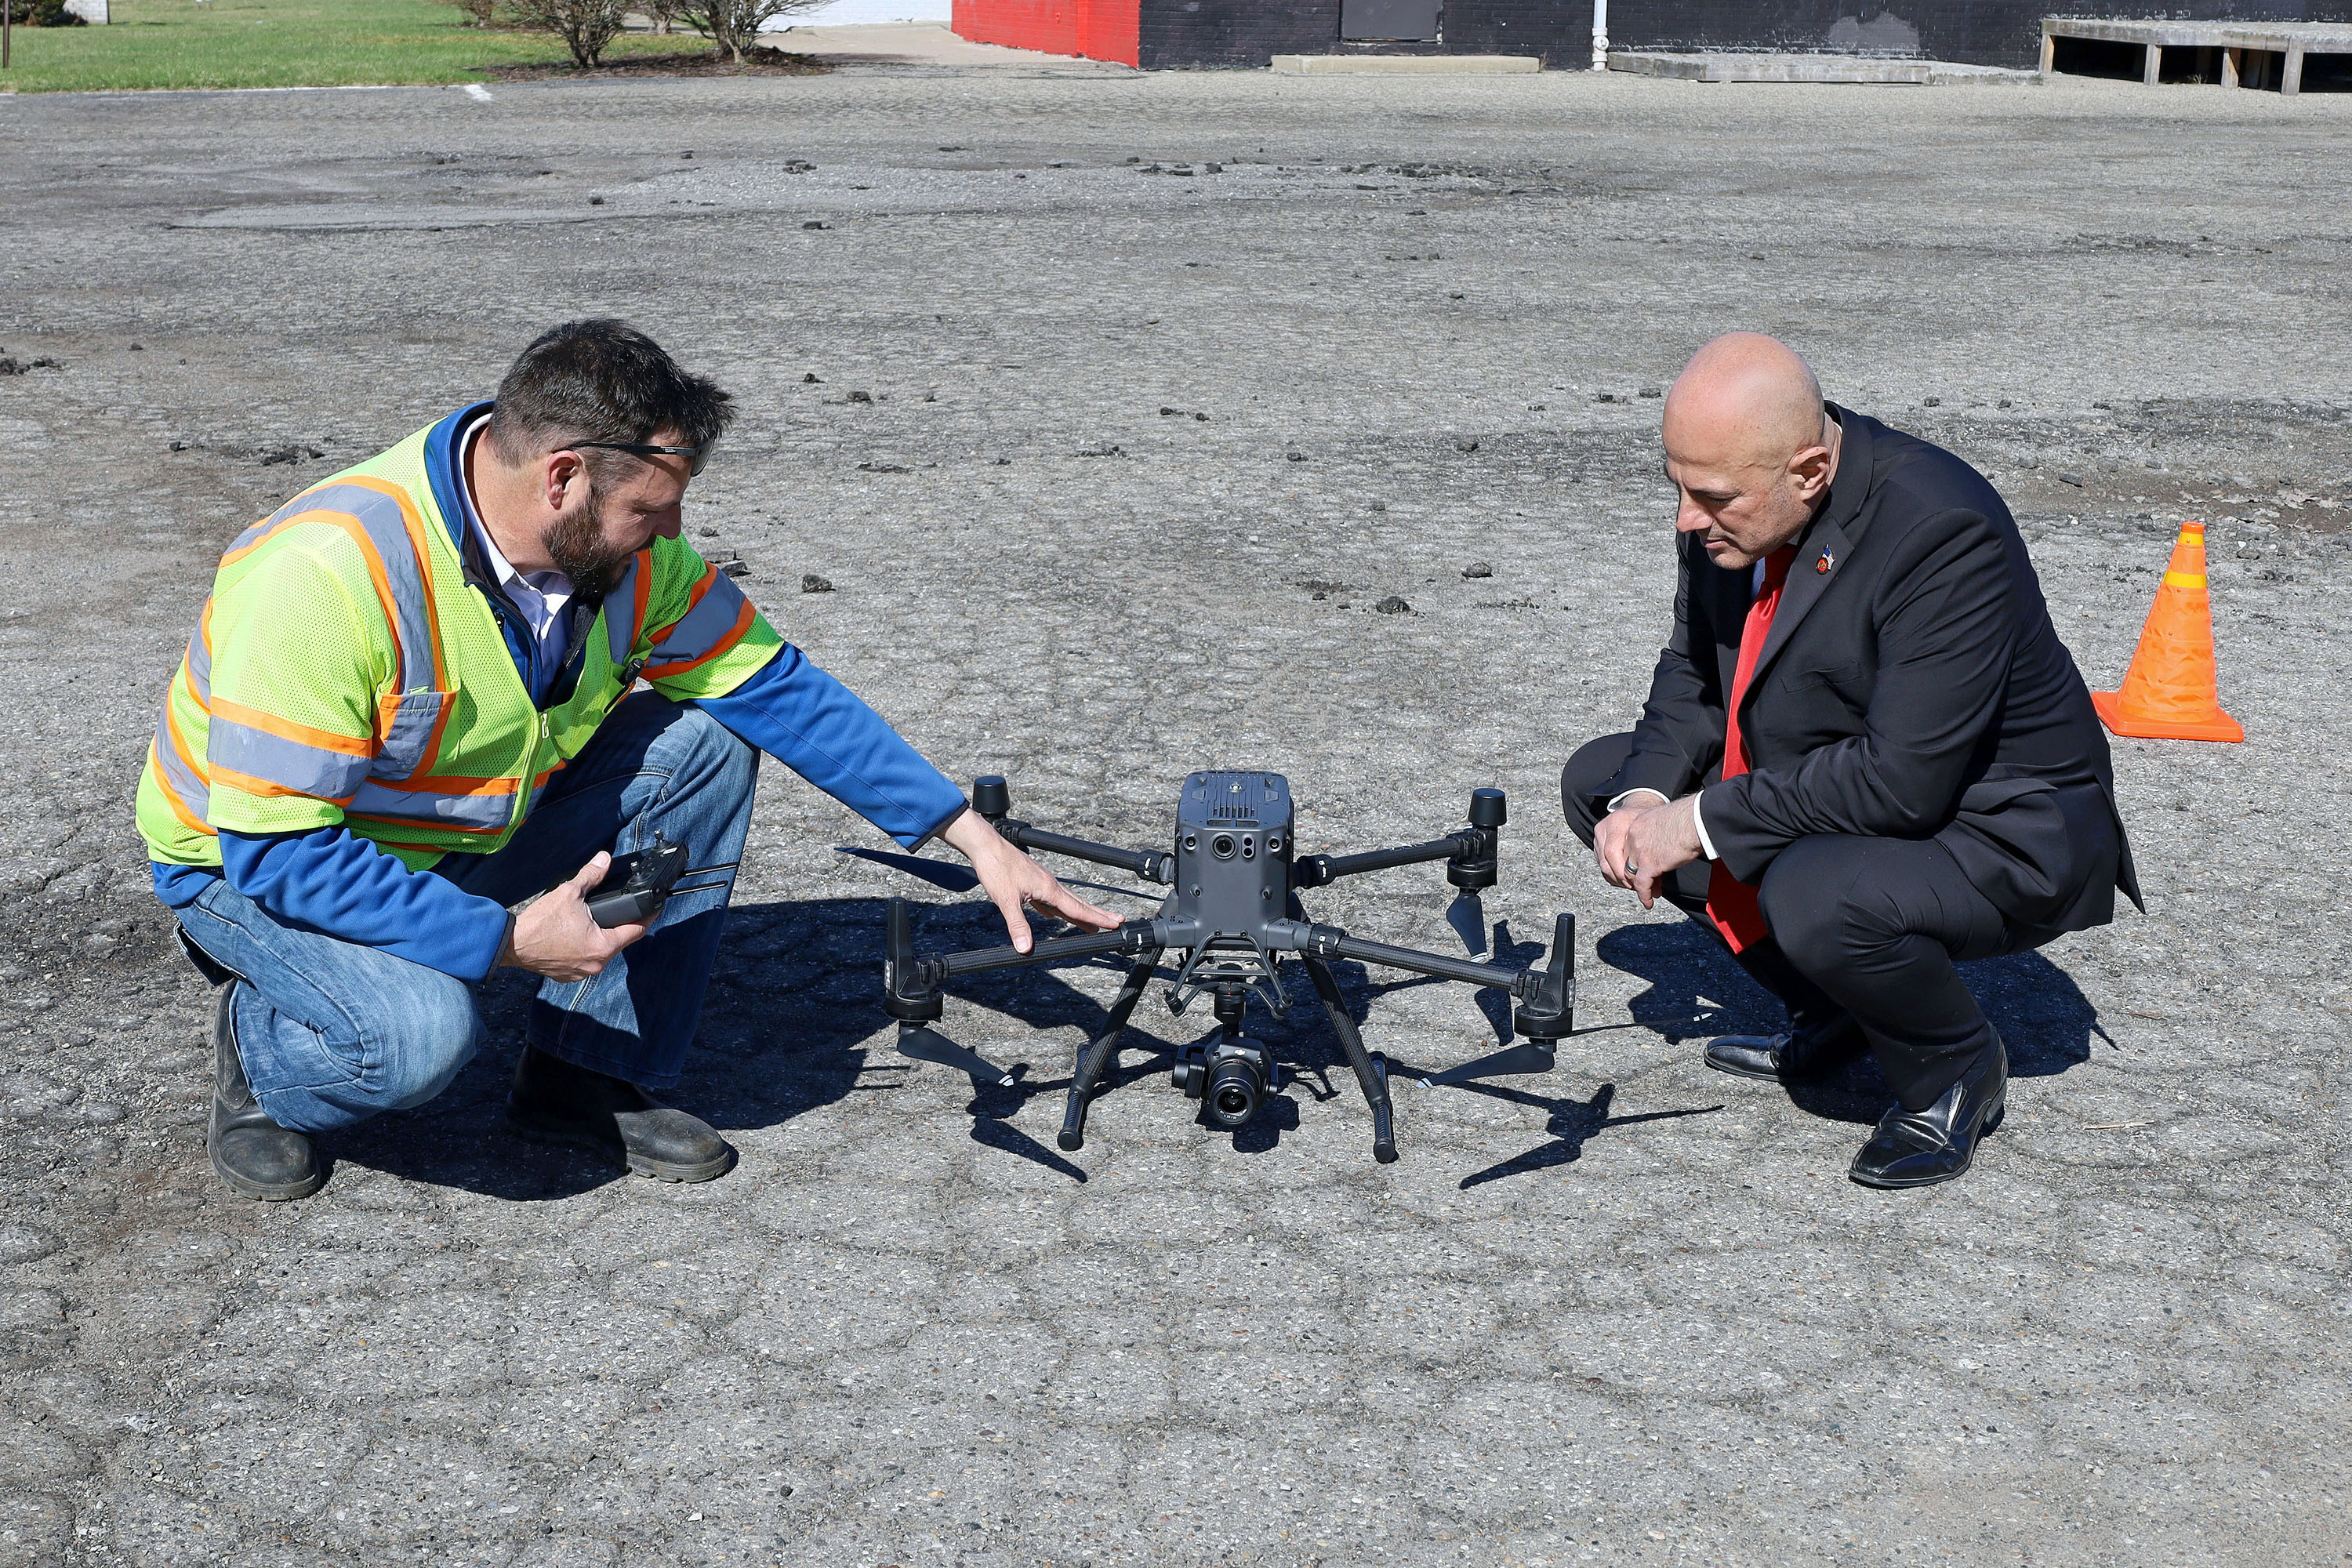 City partners with Wade to perform drone aerial survey of Creek